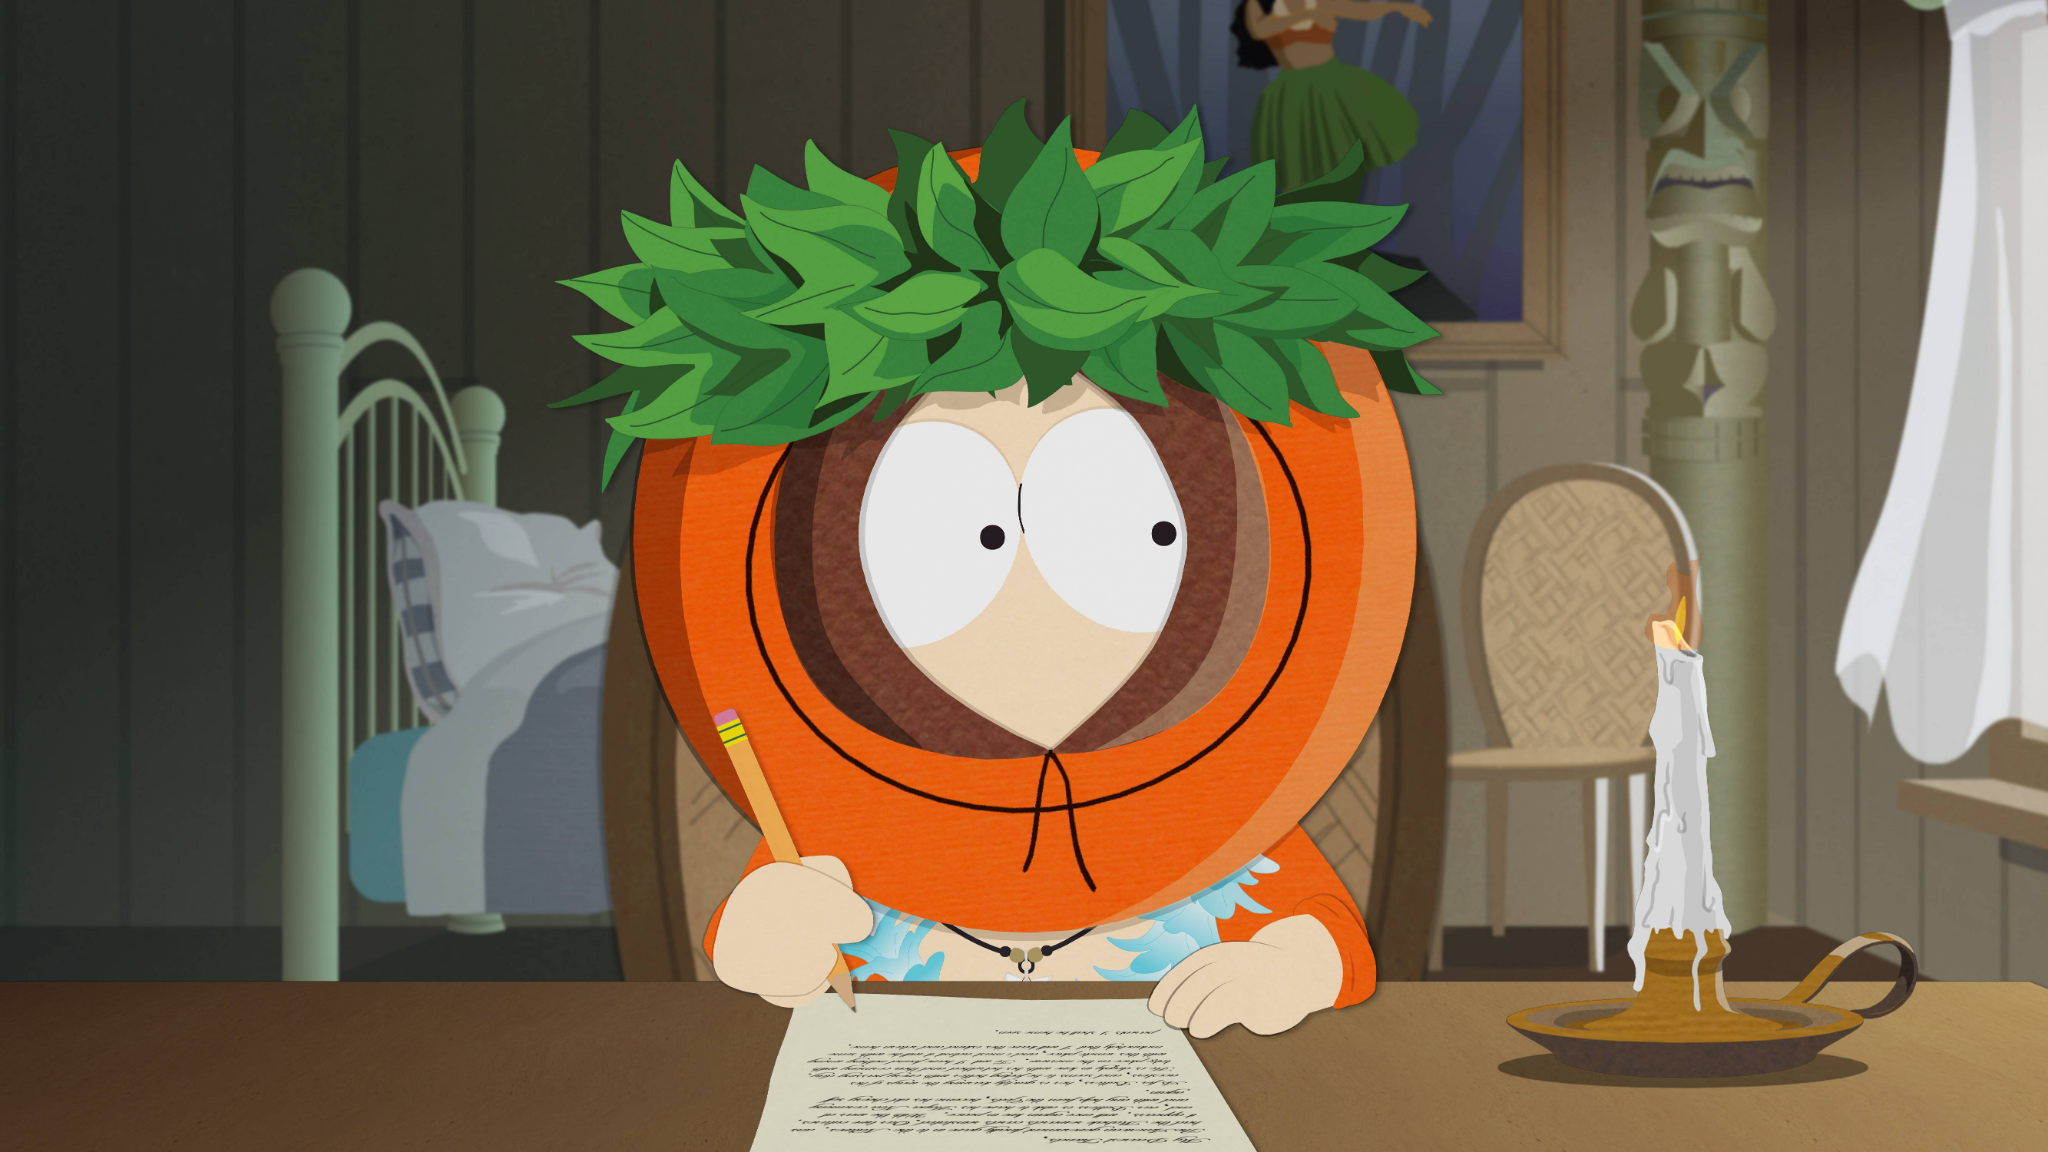 South Park character Kenny wearing a garland on his head in the episode “Going Native.”